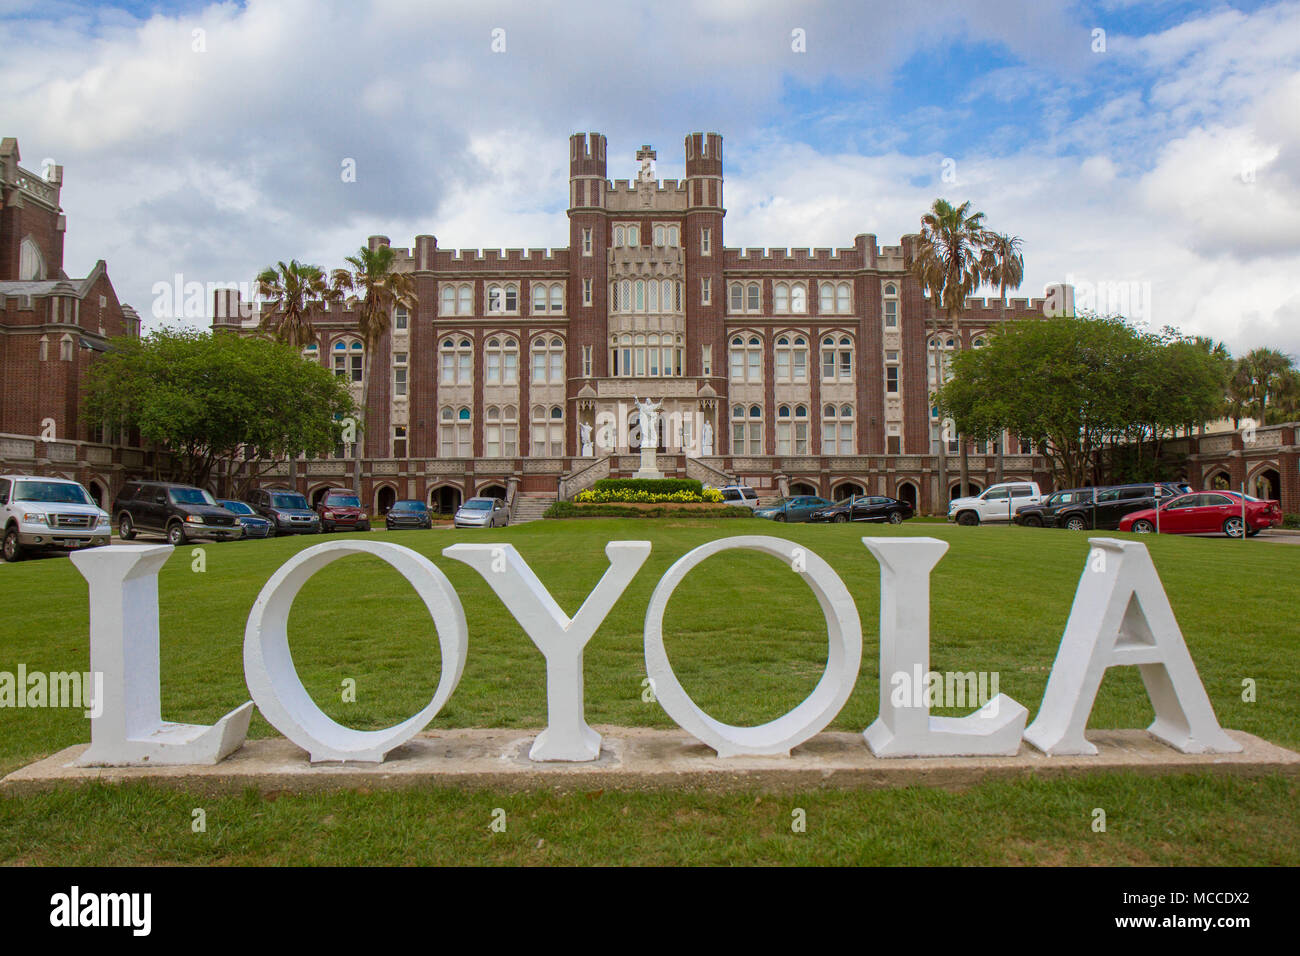 Loyola University, New Orleans, Louisiana, USA. White university sign with the name LOYOLA in front with university buildings behind sign. Horizontal. Stock Photo